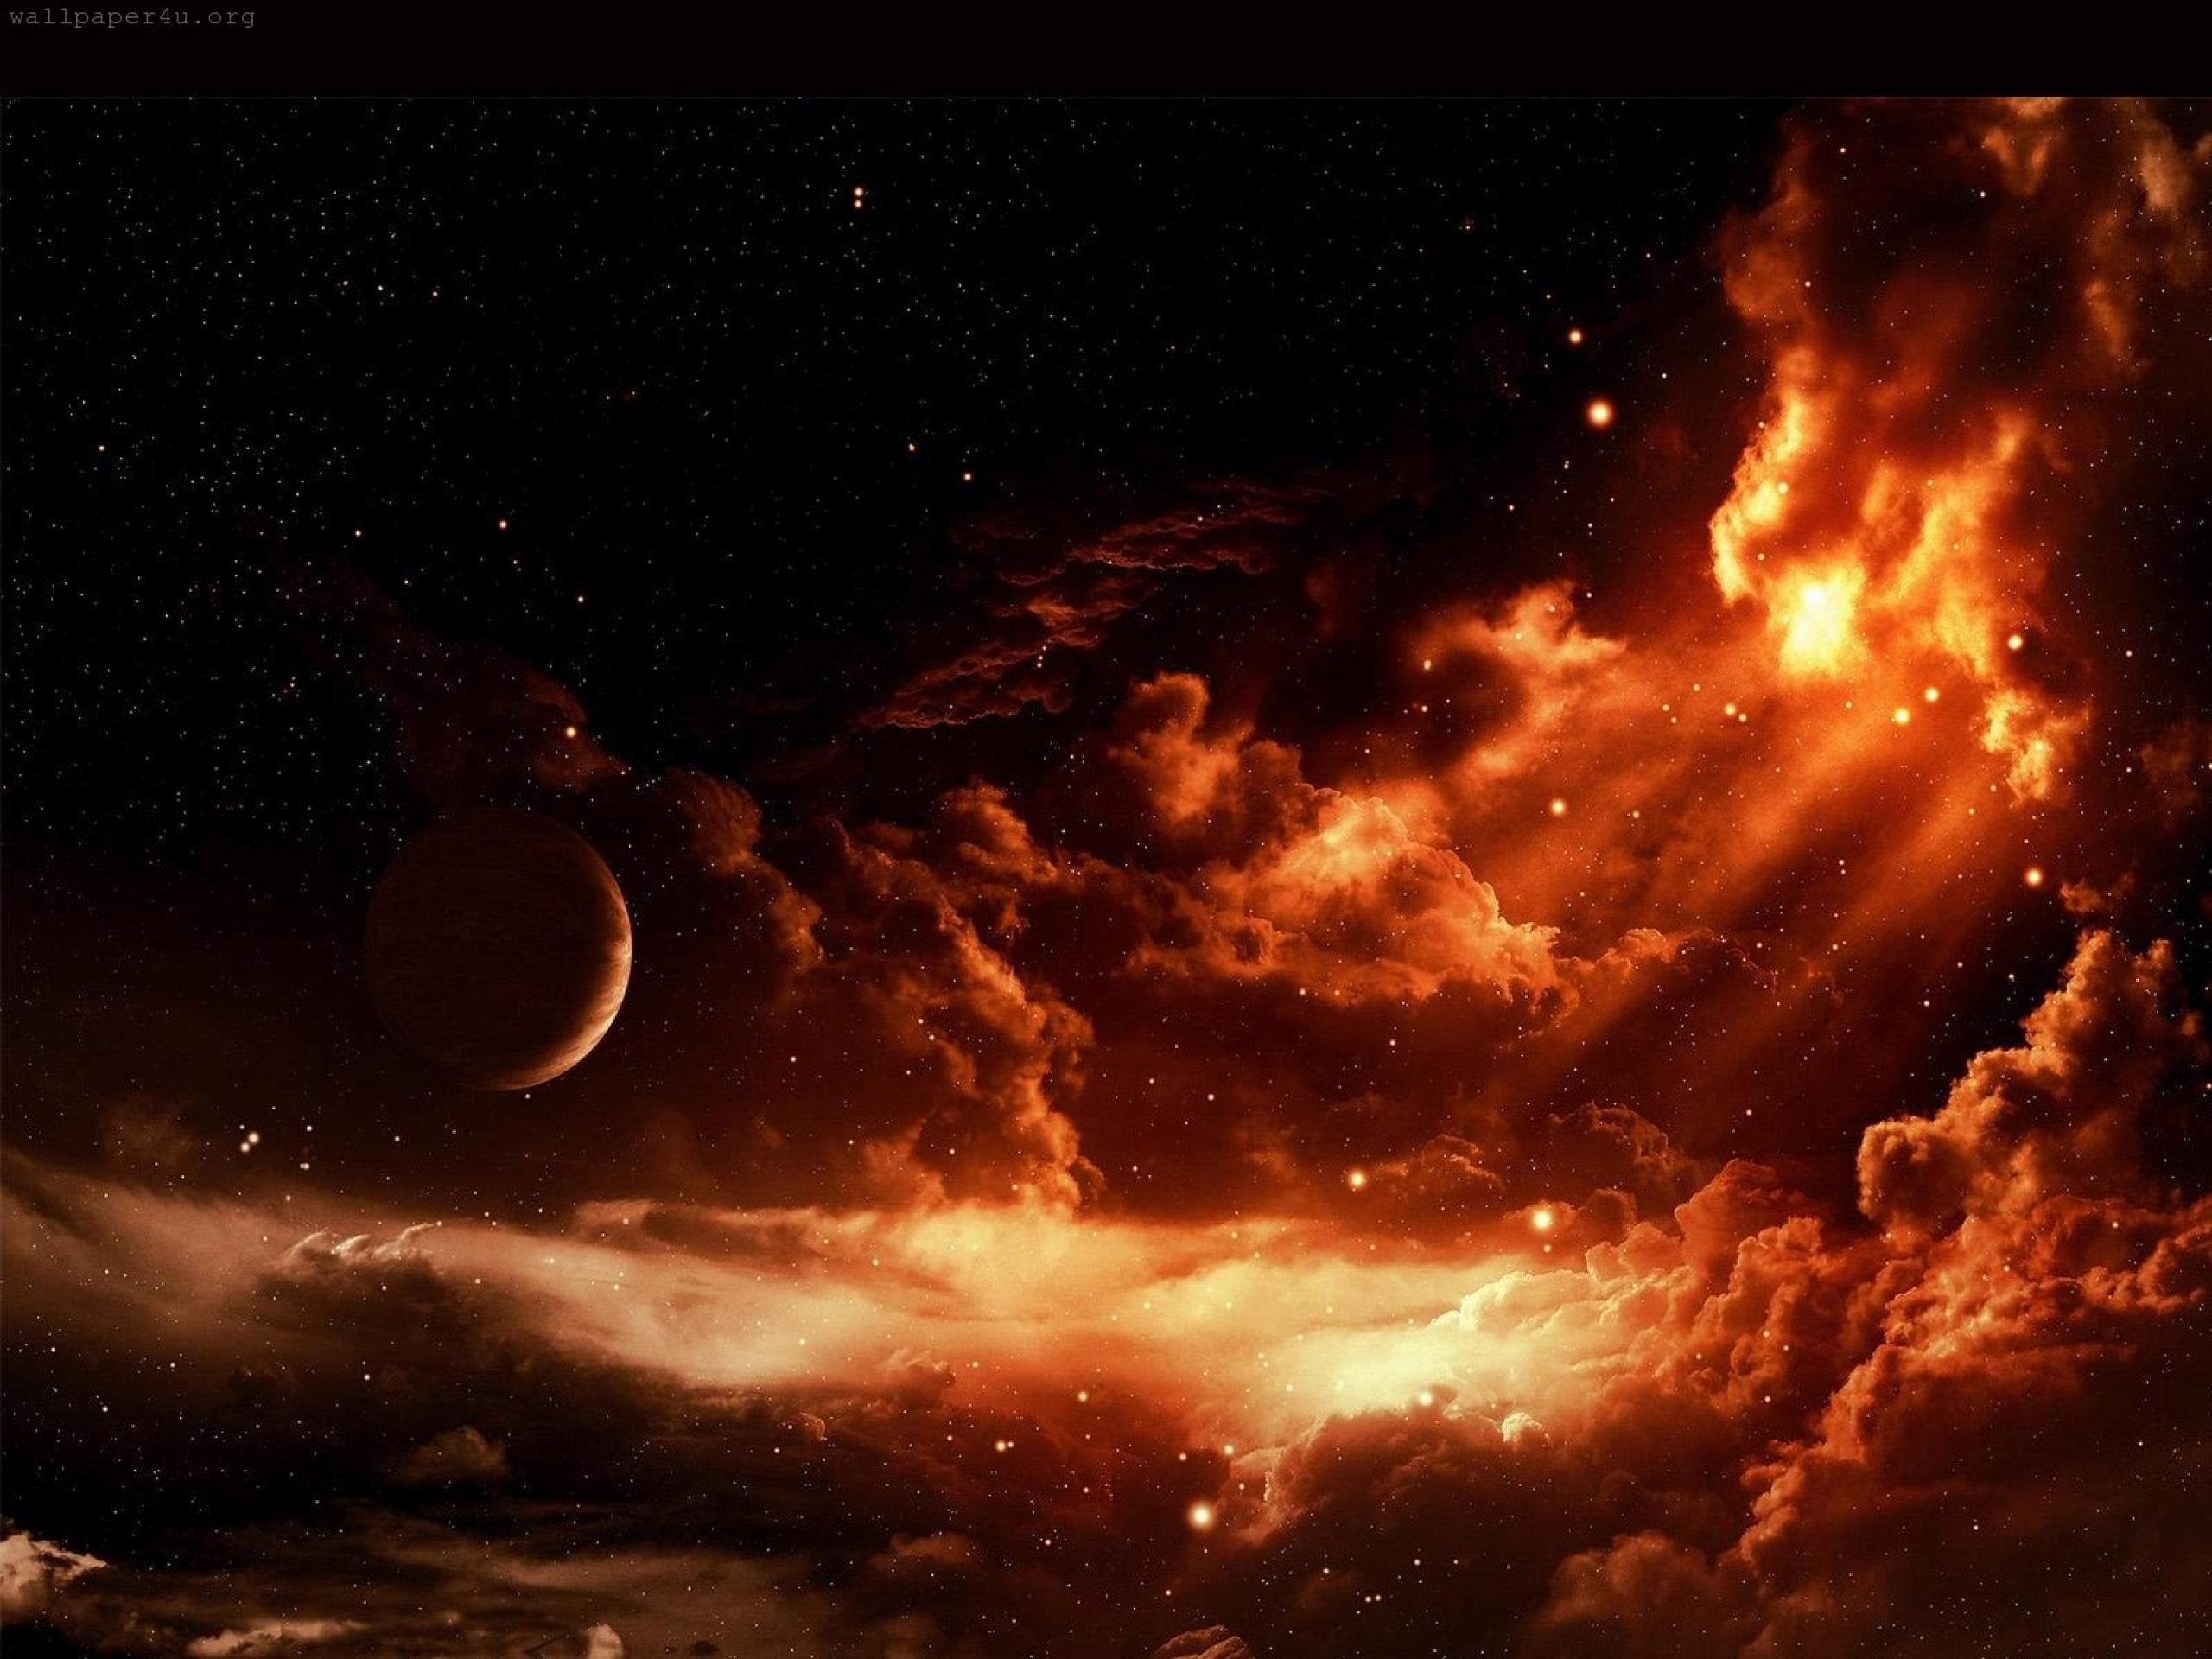 Wallpaper For > Epic Space Wallpaper 1920x1080